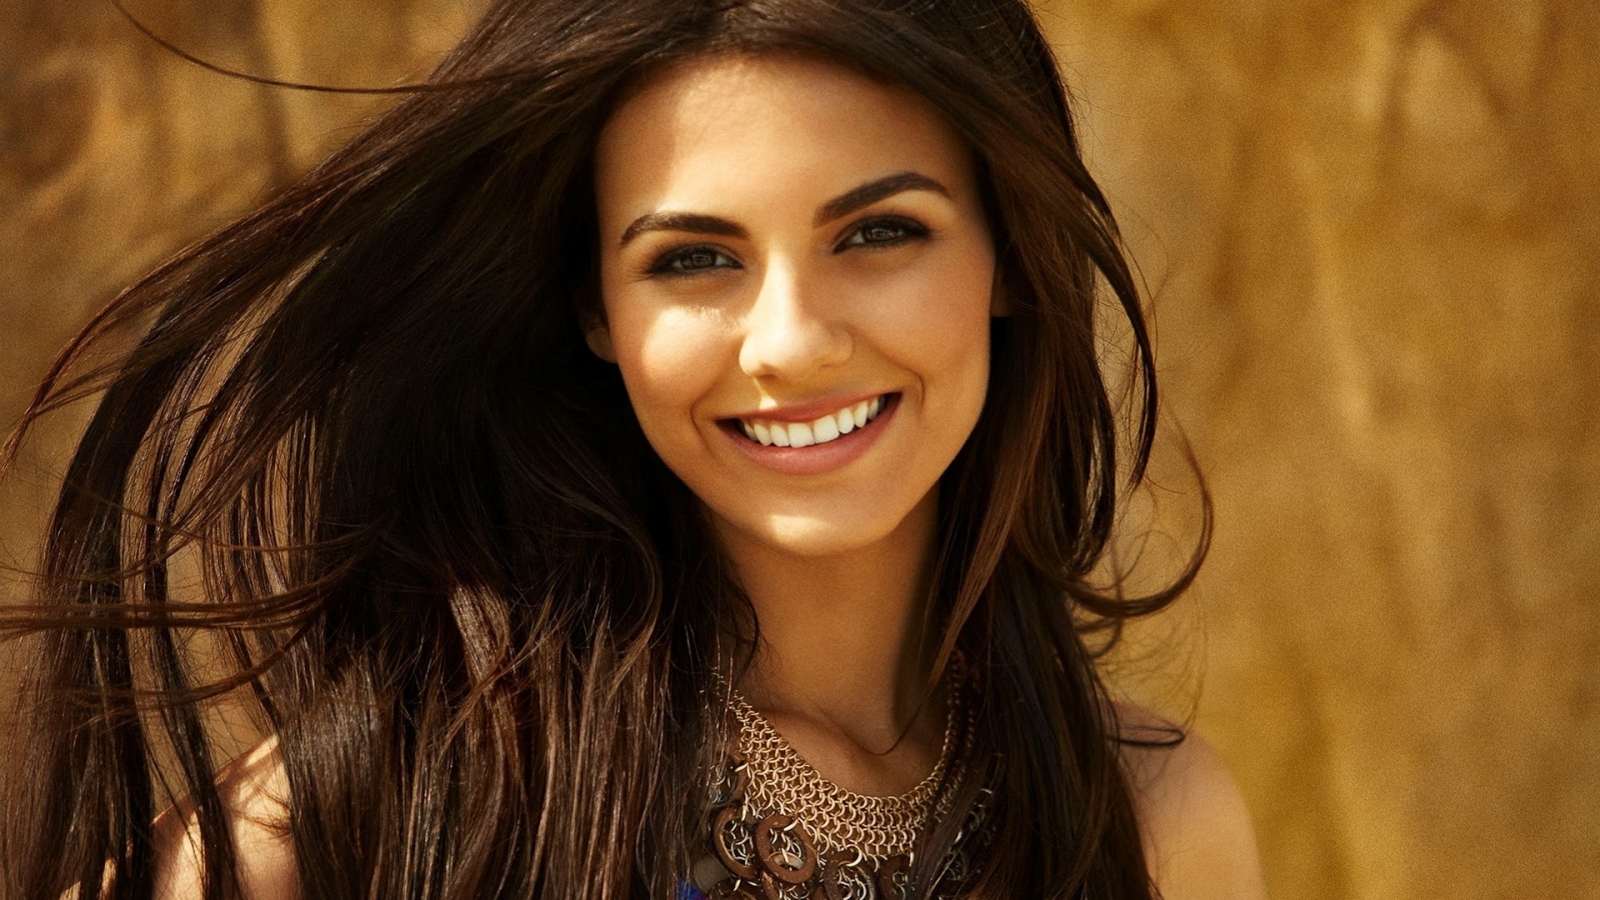 Cute Smile of Victoria Justice for 1600 x 900 HDTV resolution